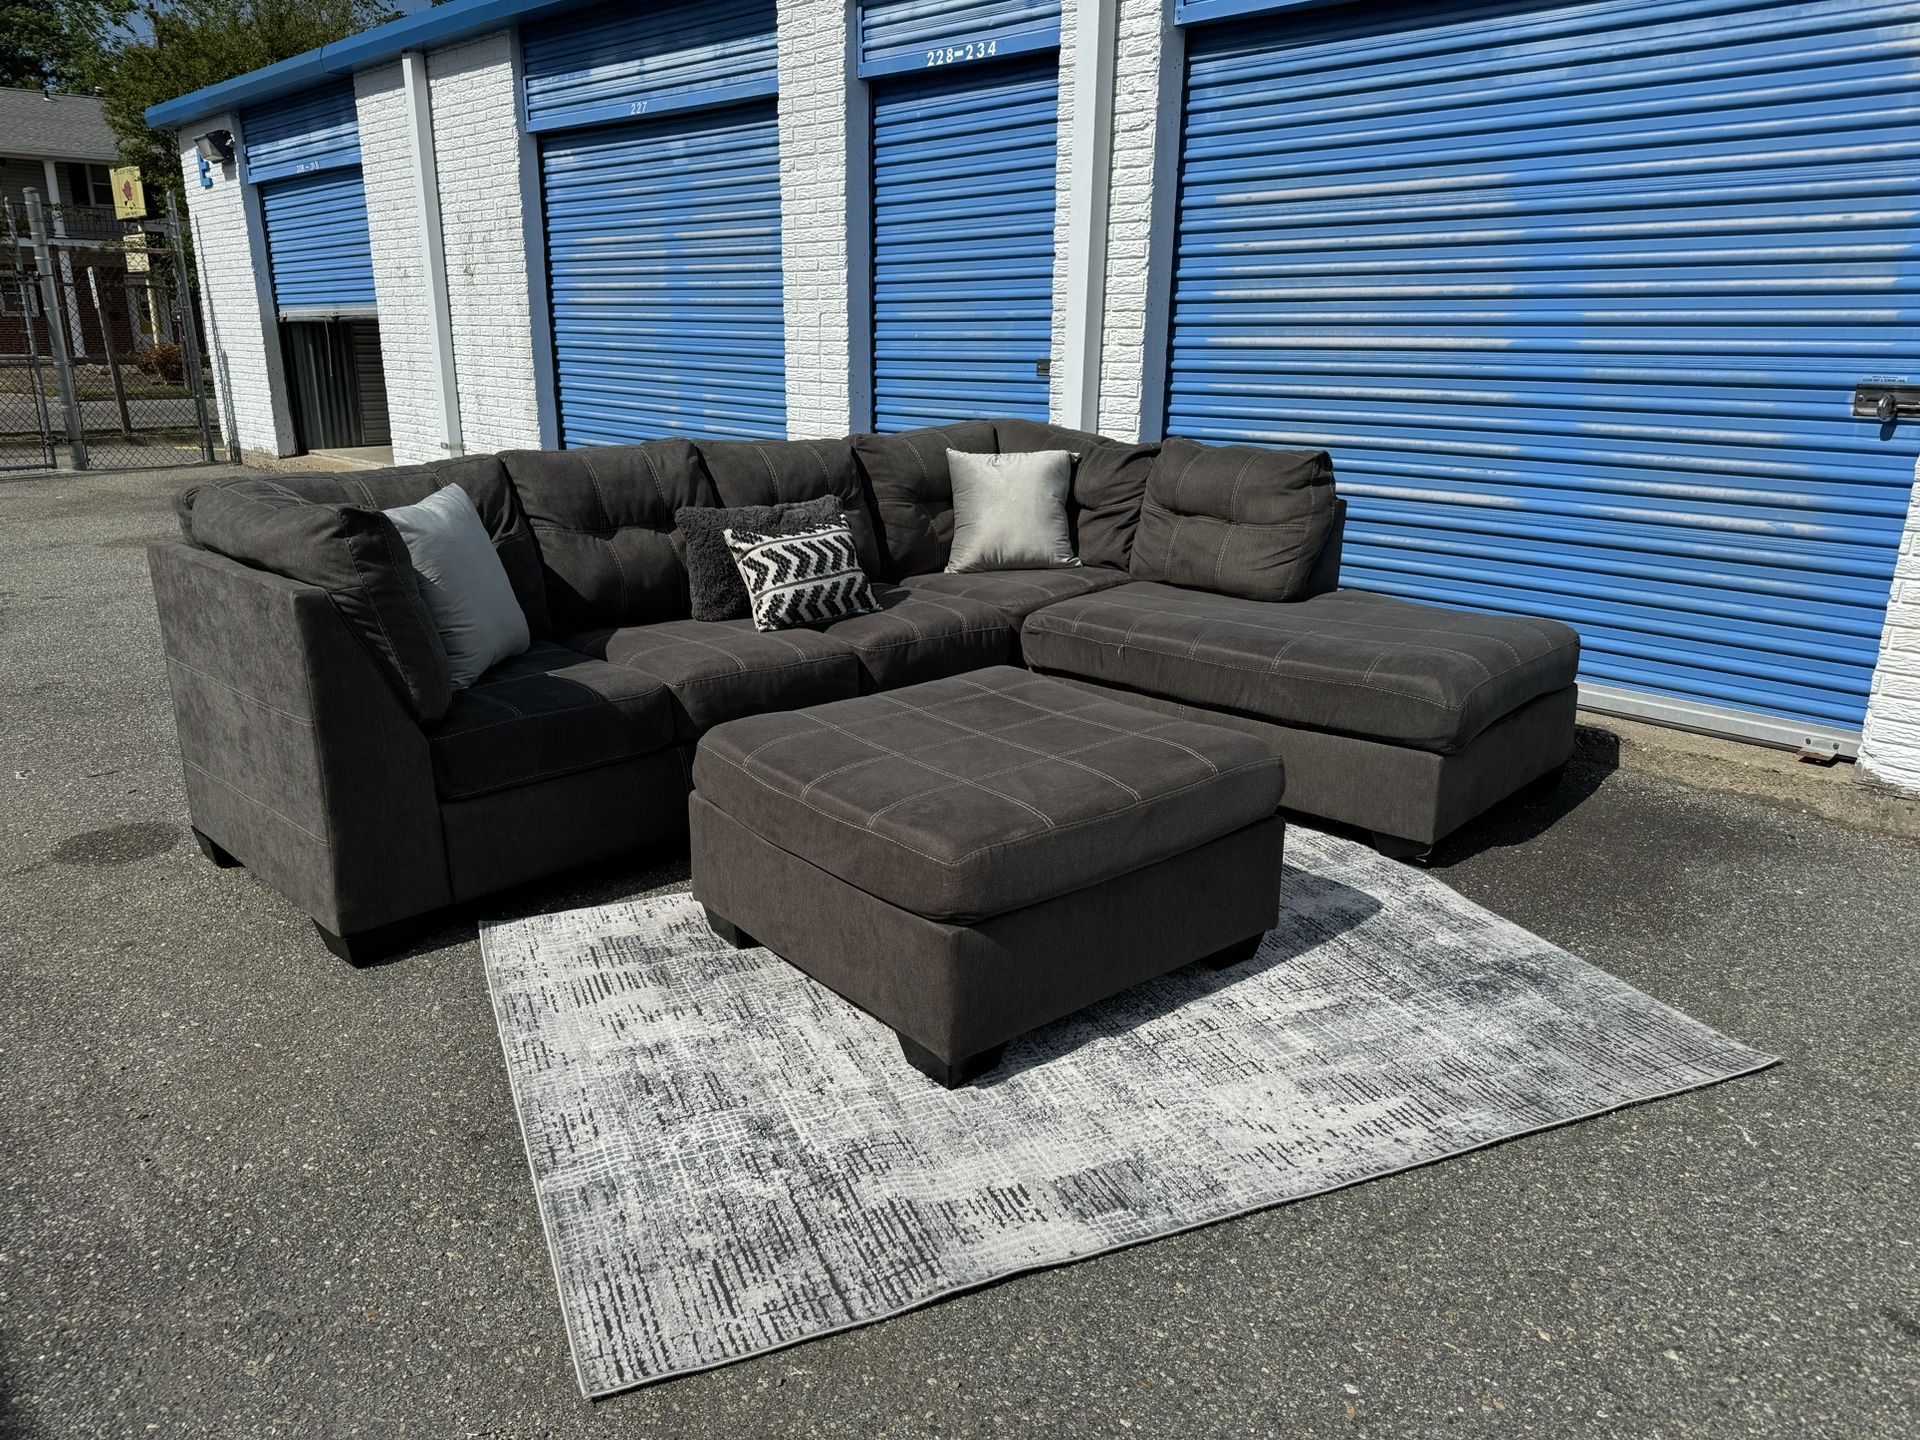 Hot Item !! Full Size Sectional W/ Pillows Rug And Ottoman